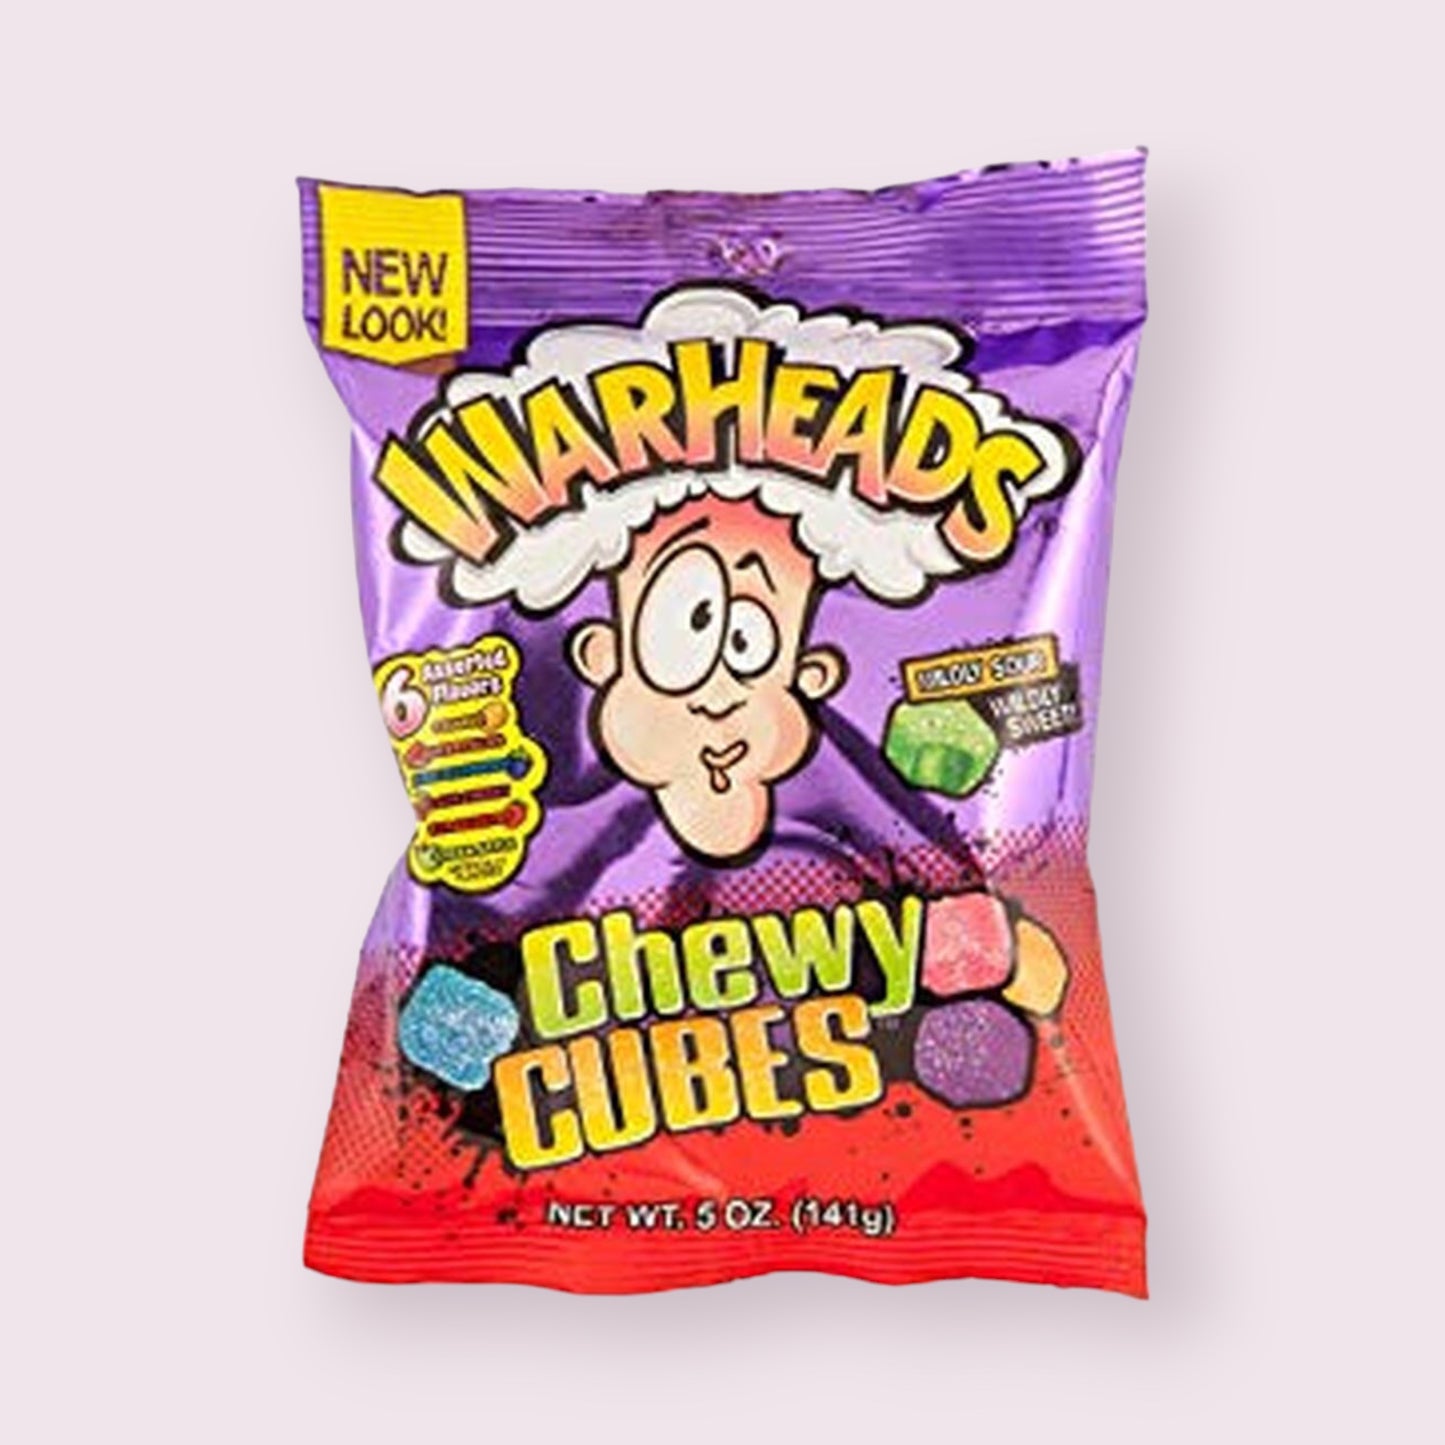 Warhead Chewy Cubes Bag Sours Pixie Candy Shoppe   